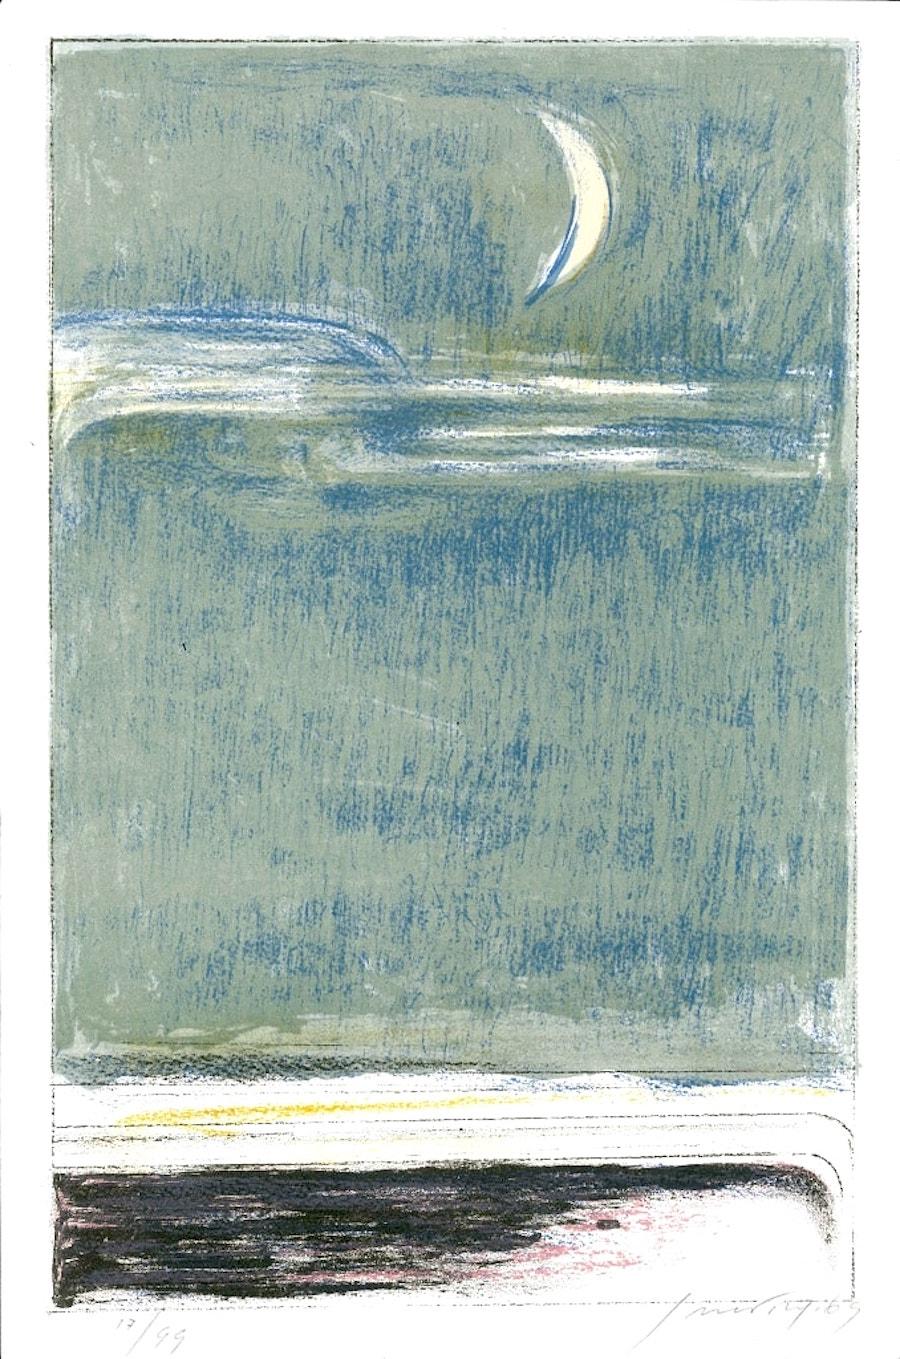 Lithograph hand-numbered (Arab numbers) and hand-signed with pencil on lower margin by the Sicilian artist and the leader of the Scicli School, Piero Guccione. Edition of 99 prints.

Wonderful print, representing a marine horizon under a slice of